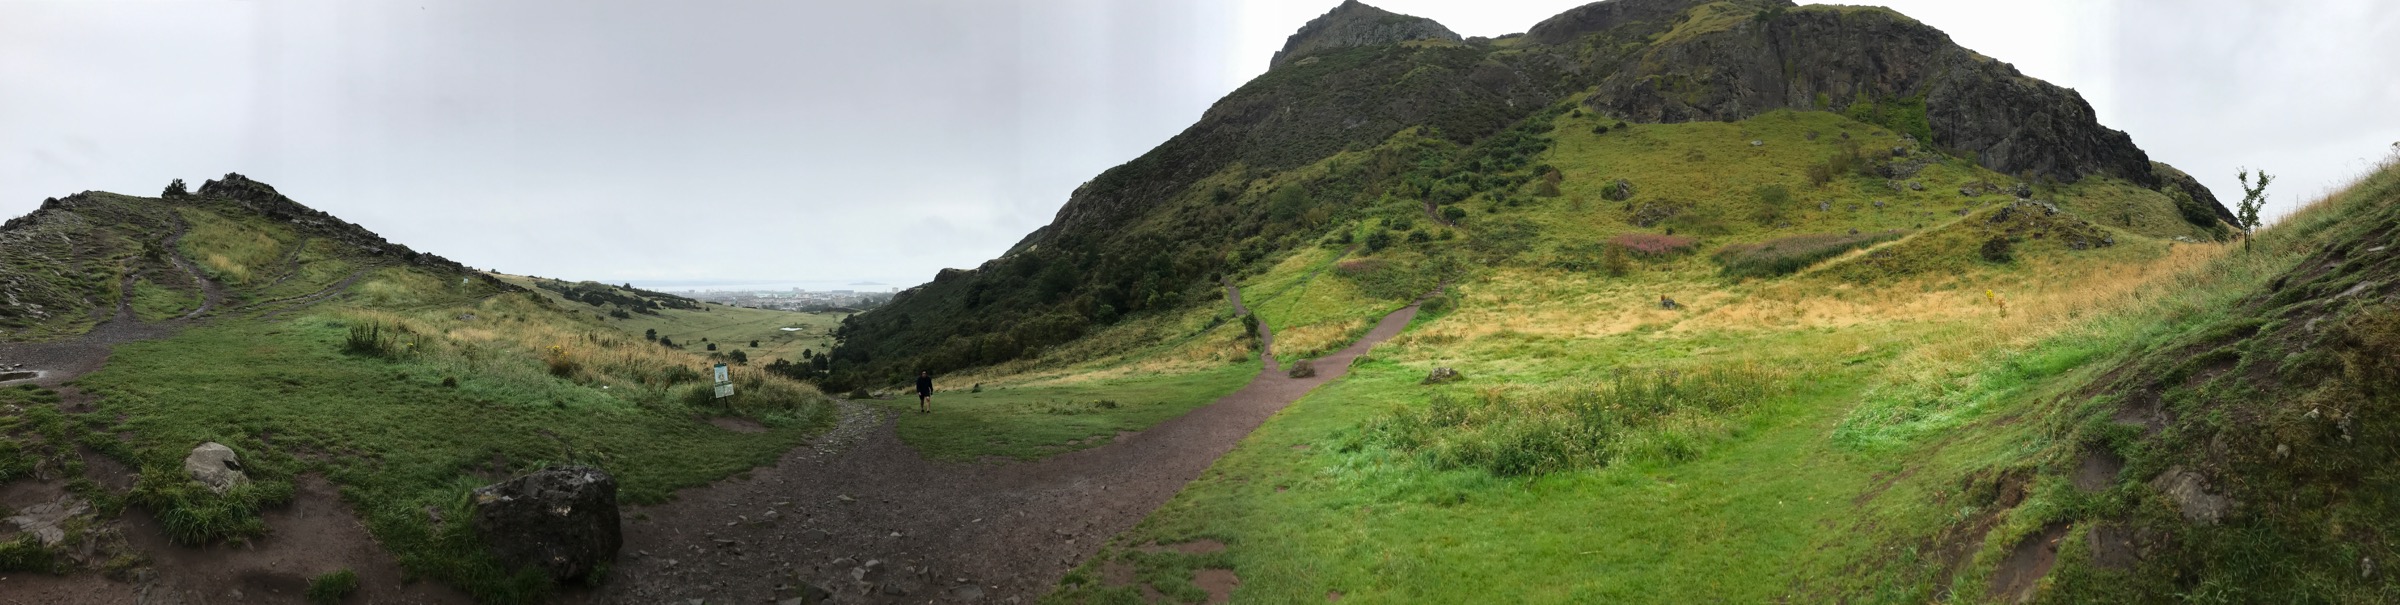 Looking up at Arthur's Seat from the beginning of the hike.